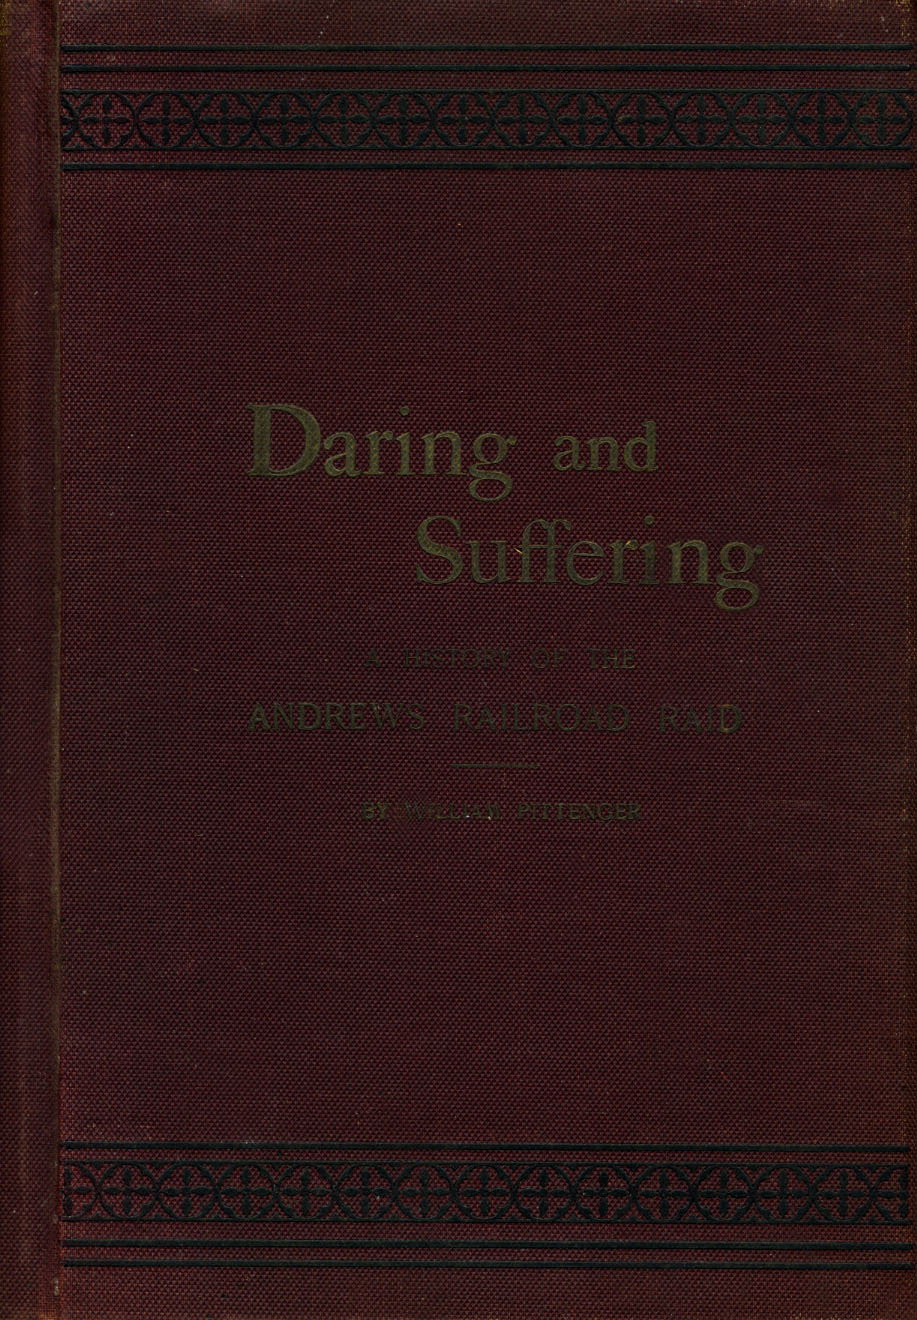 Daring and Suffering by William Pittenger